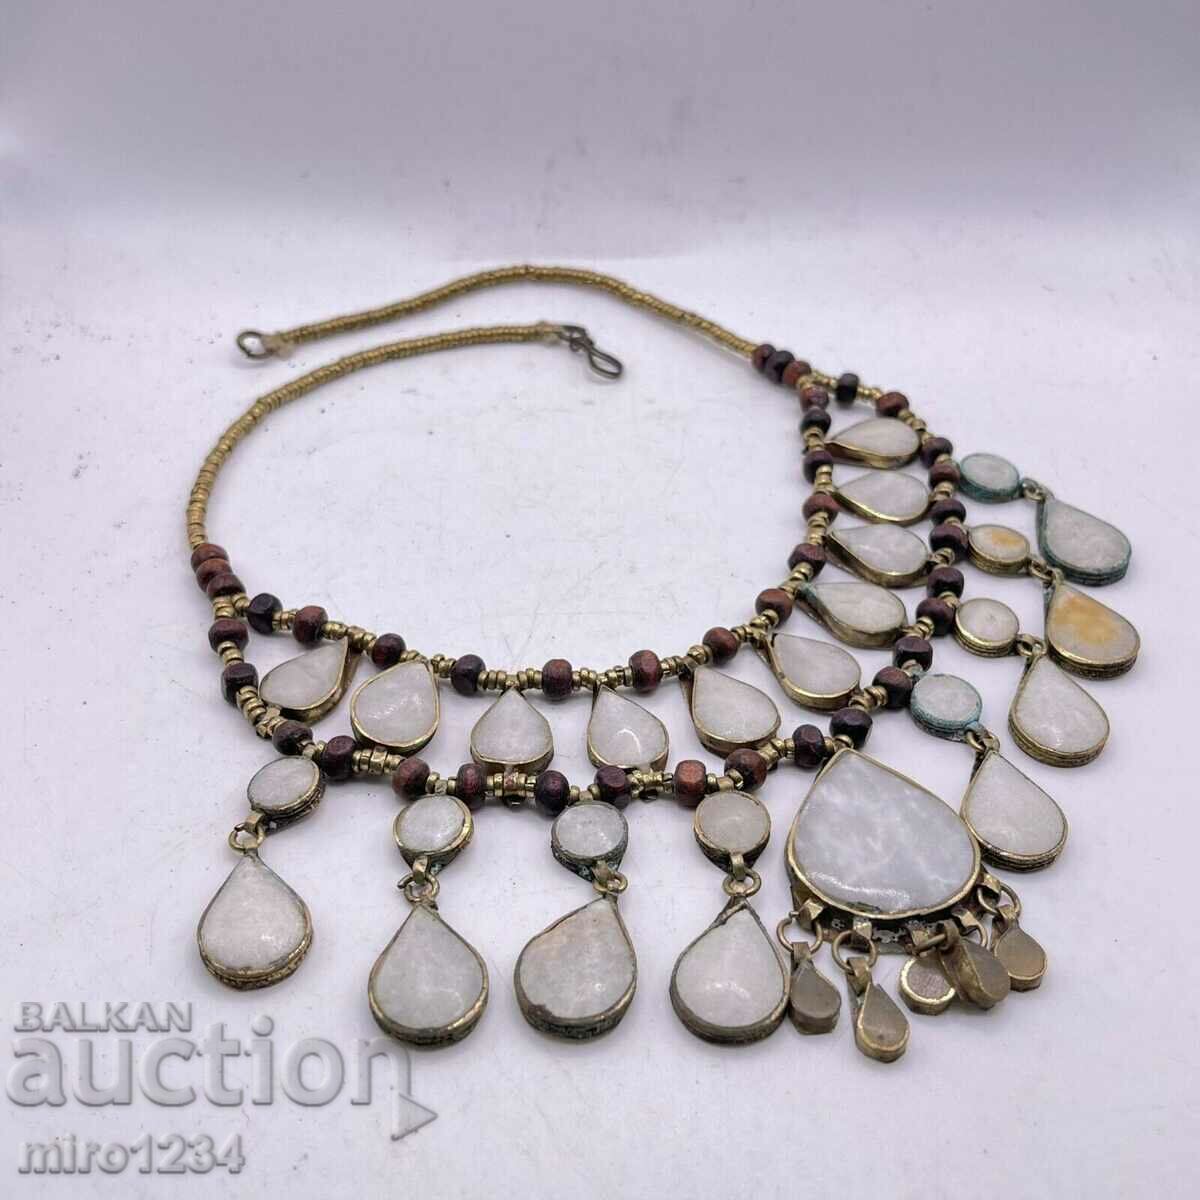 OLD WOMEN'S NECKLACE NECKLACE CHAIN NATURAL STONES